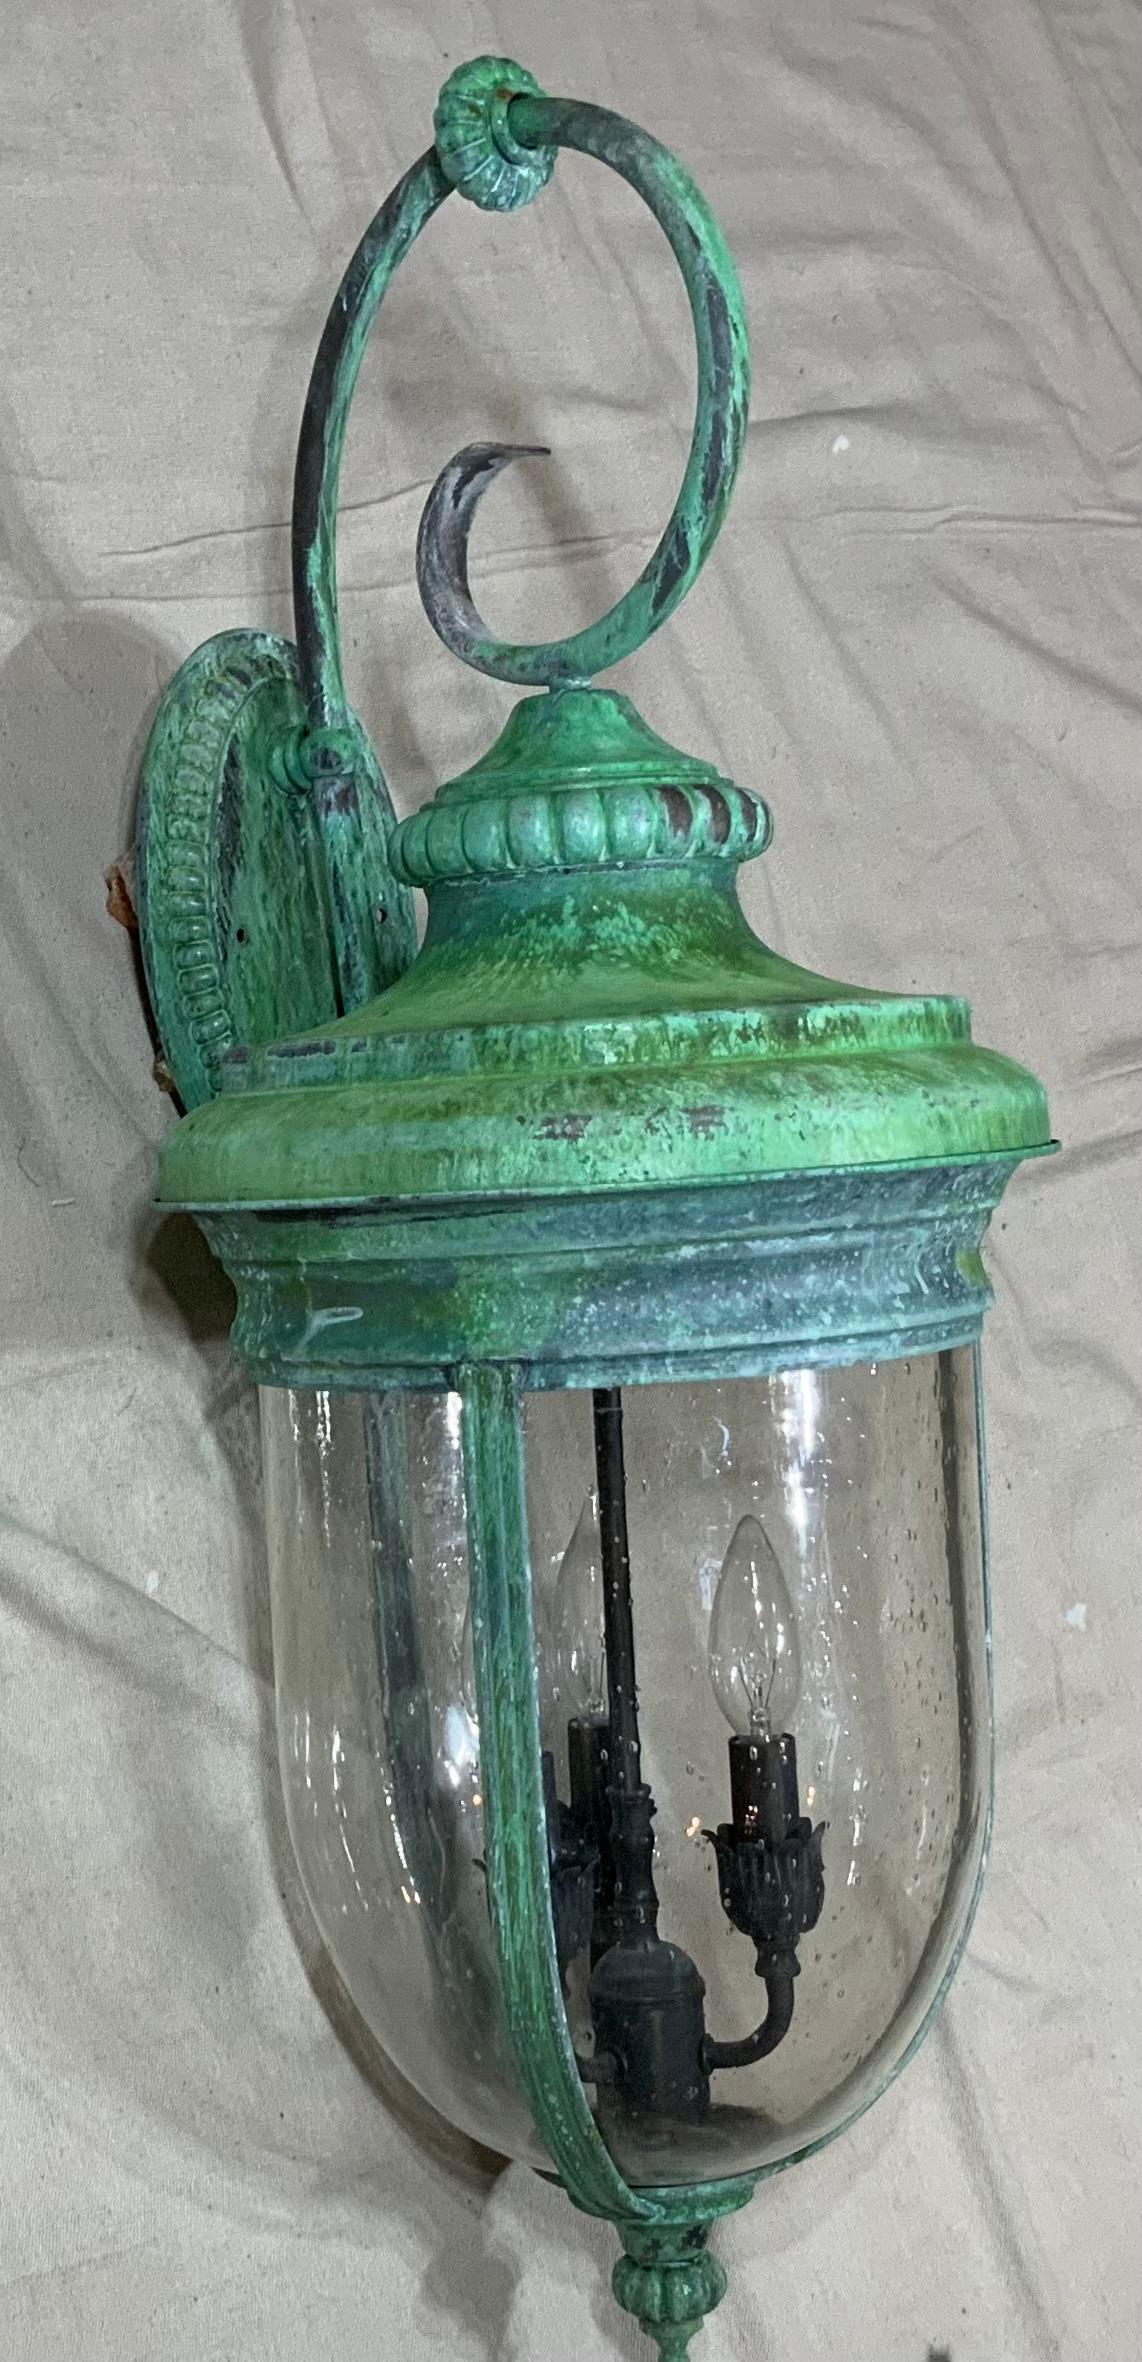 Exceptional single large wall lantern made of solid copper-brass , quality workmanship, electrified with three 40/watt light each, beautiful seeded glass. Great light exposure.
Suitable for wet location. 
Great patina decorative pair of lantern